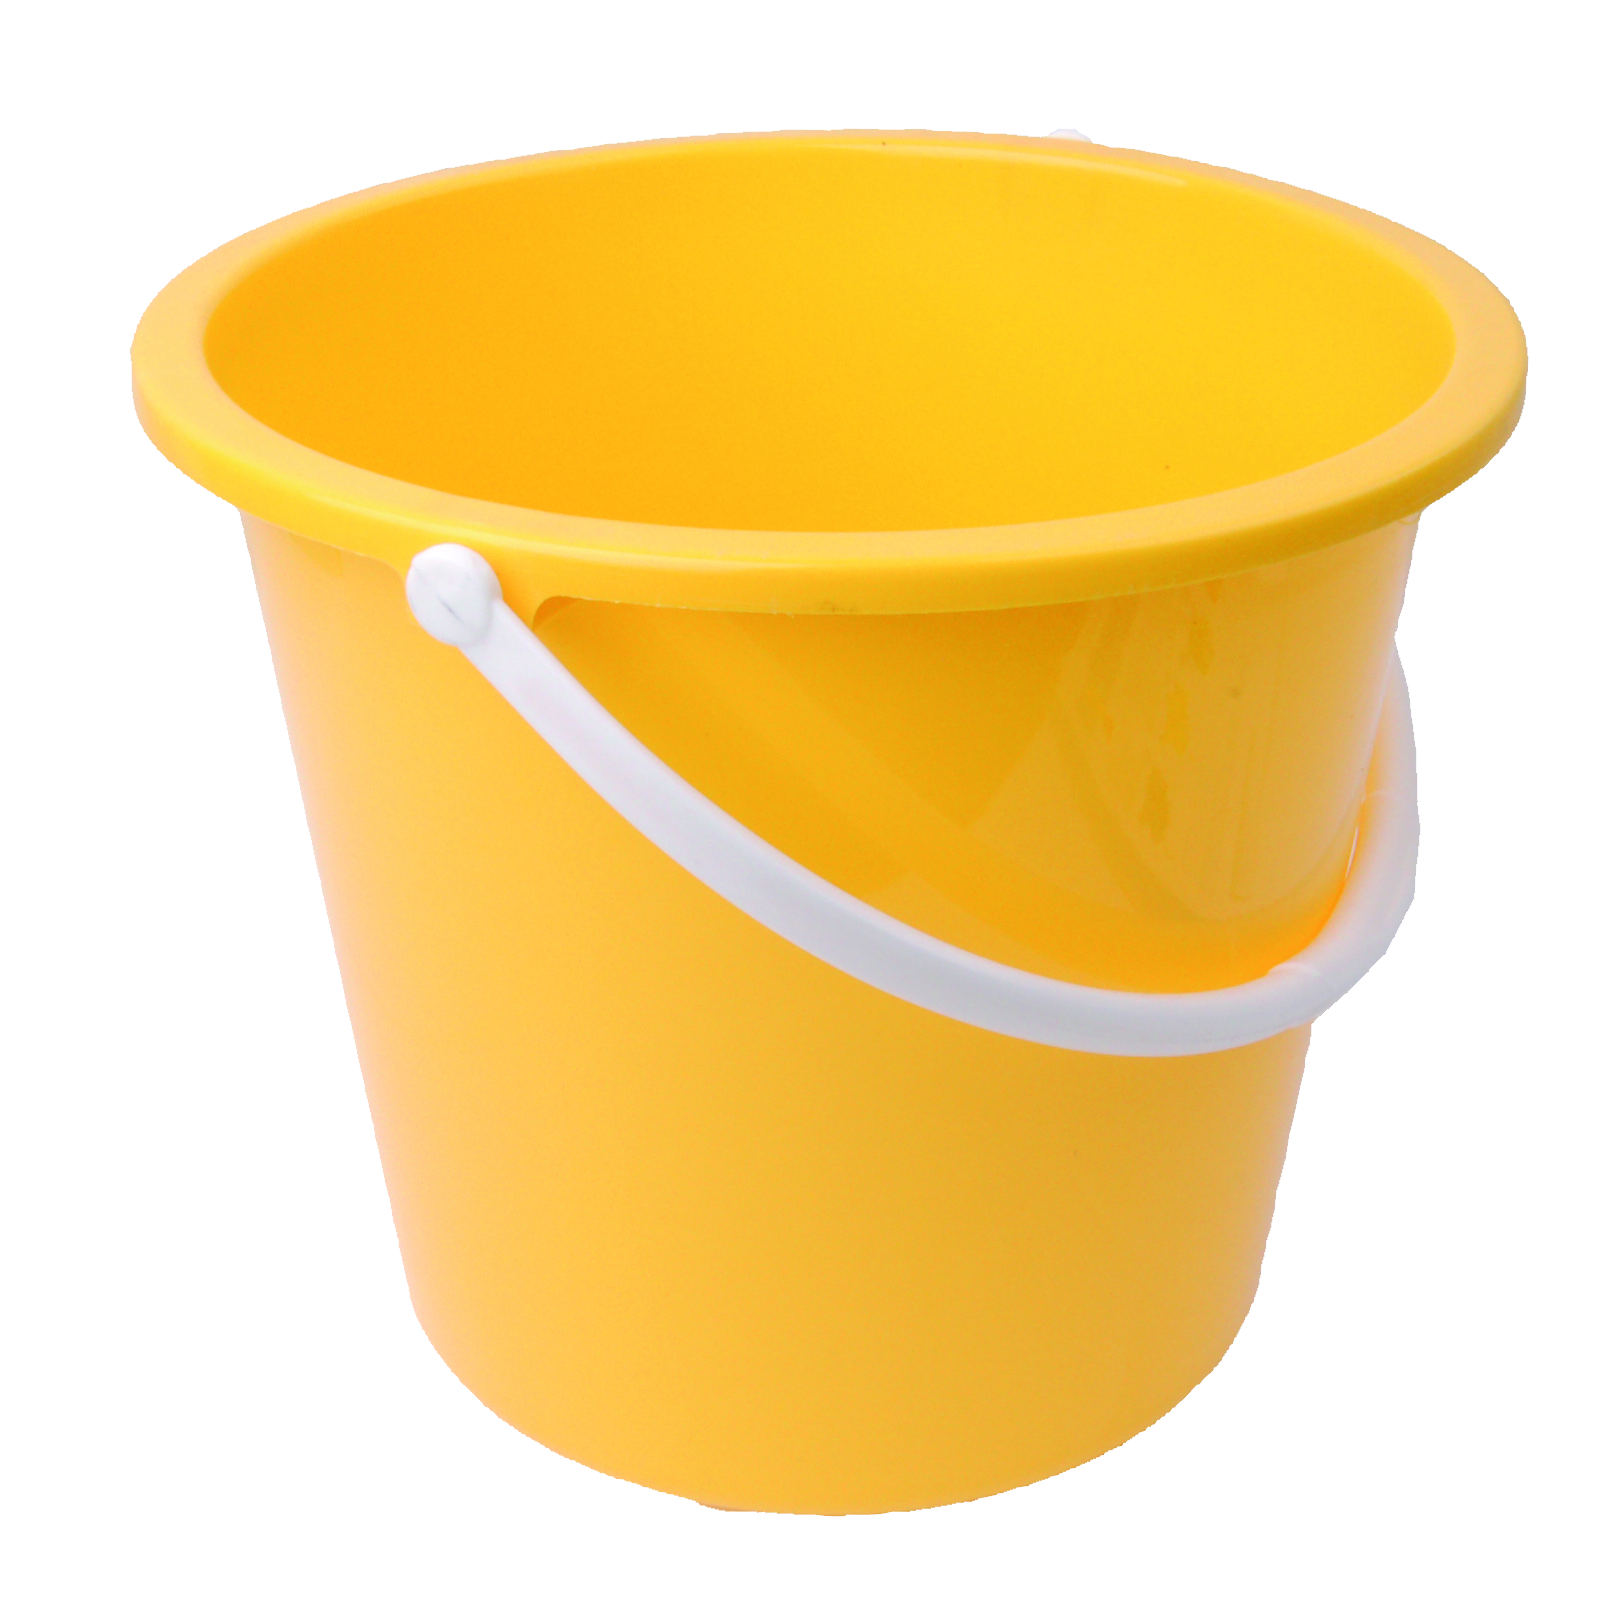 Yellow Bucket PNG HQ Image pngteam.com